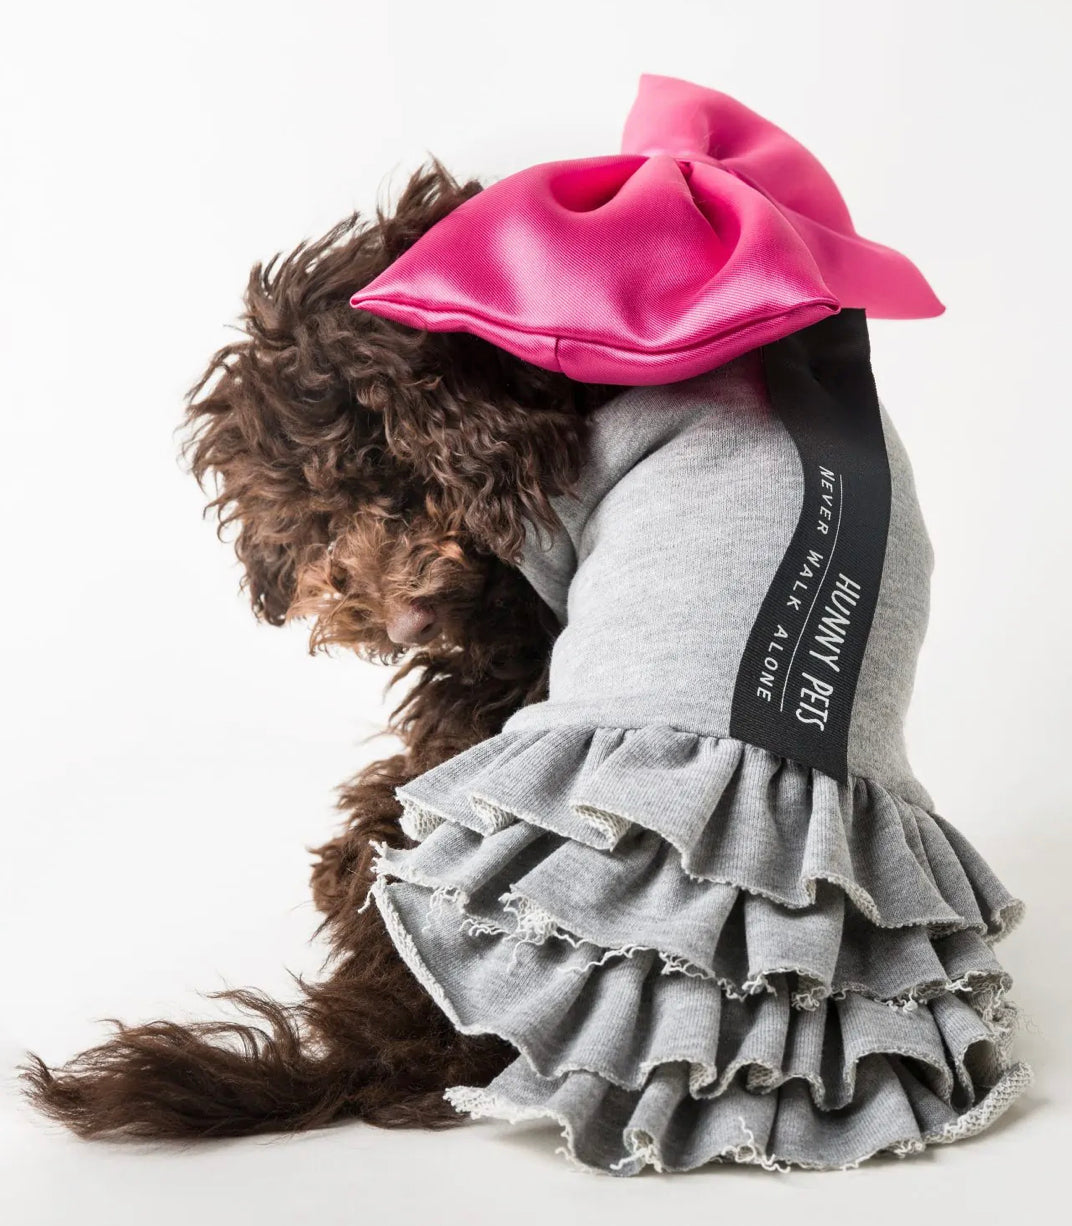 Sweatshirt with warm and super chic ruffles. Made in Italy luxury clothing for your Pet.